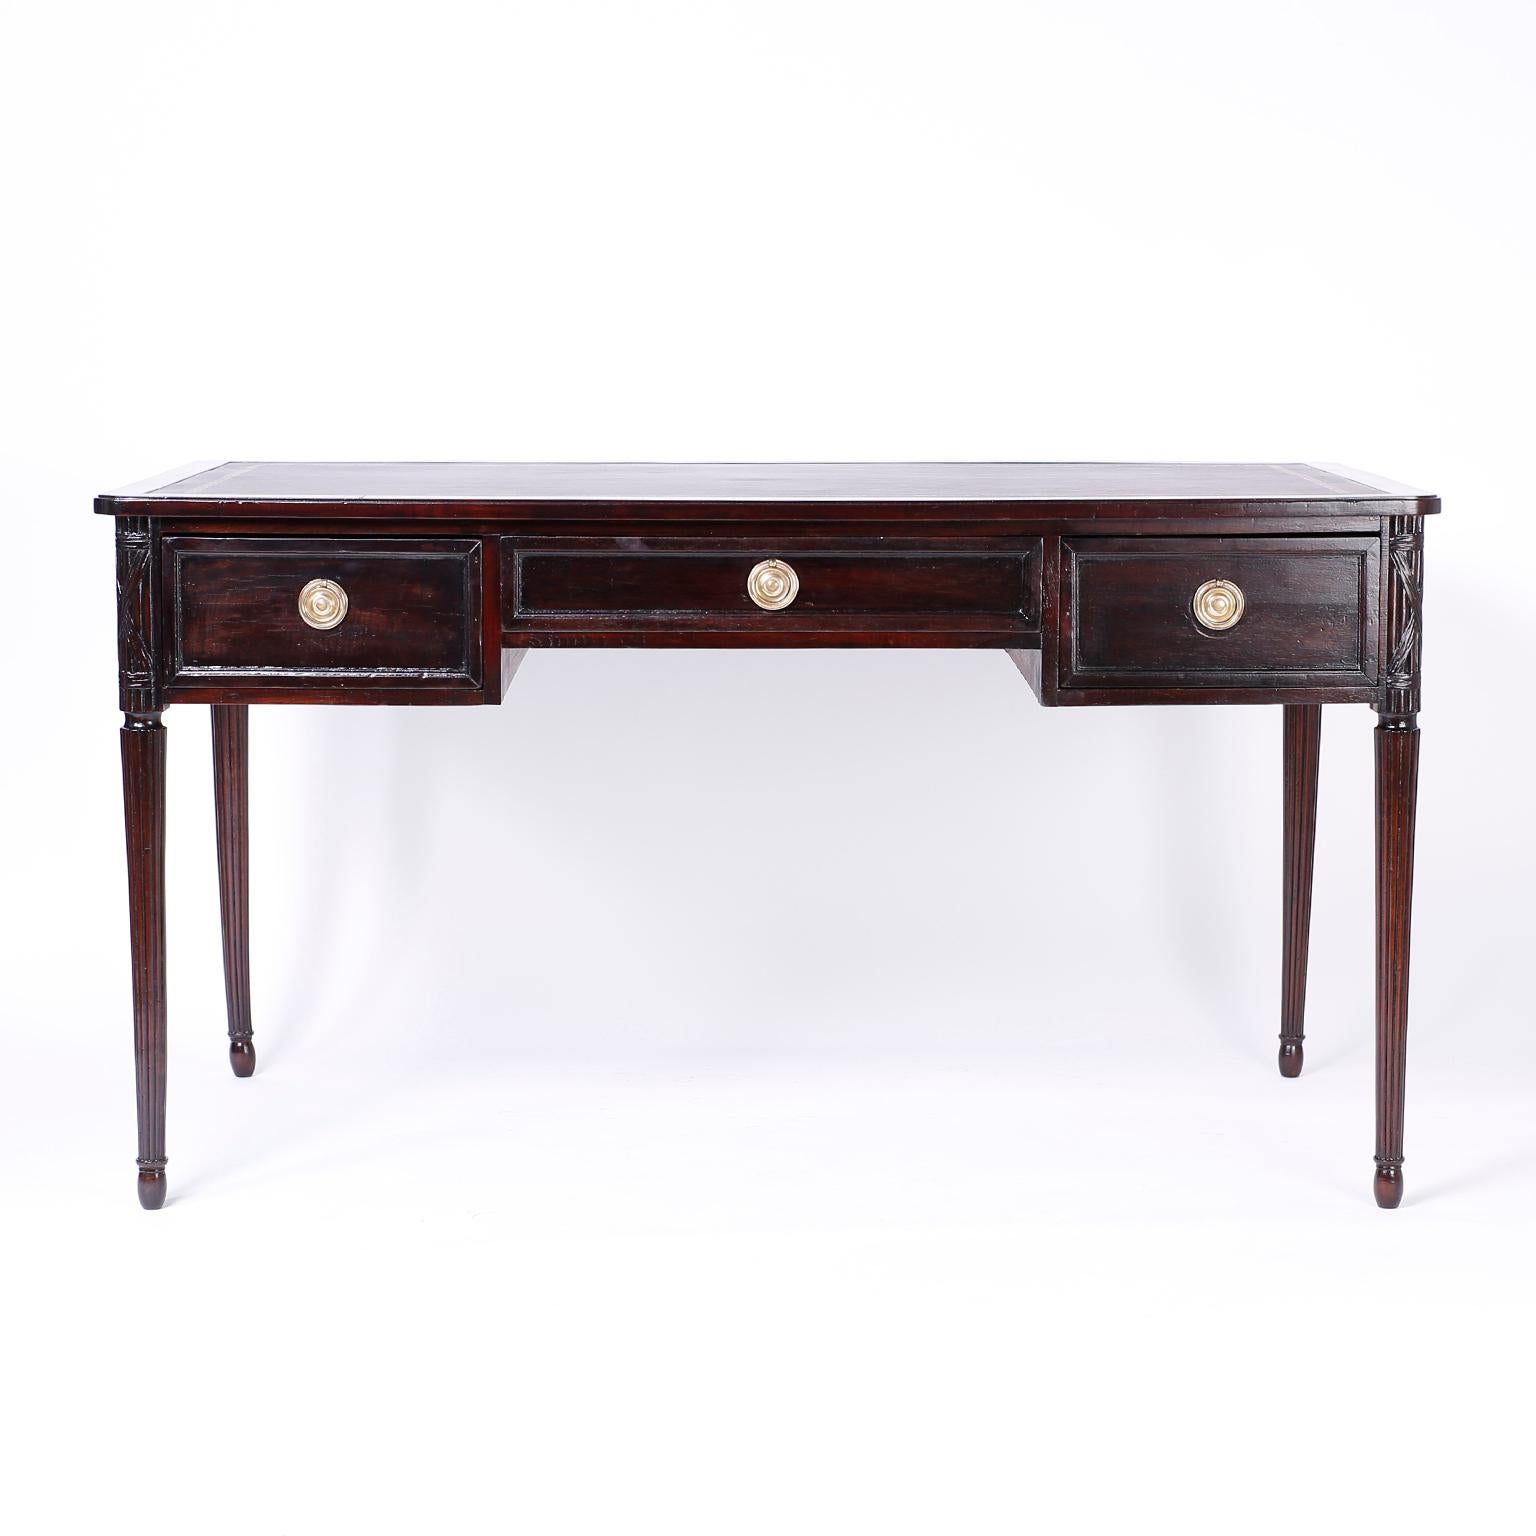 Antique French mahogany writing desk with an ox blood leather top with a gilt border, hand carved corners, paneled drawer fronts and sides and elegant turned and beaded legs.